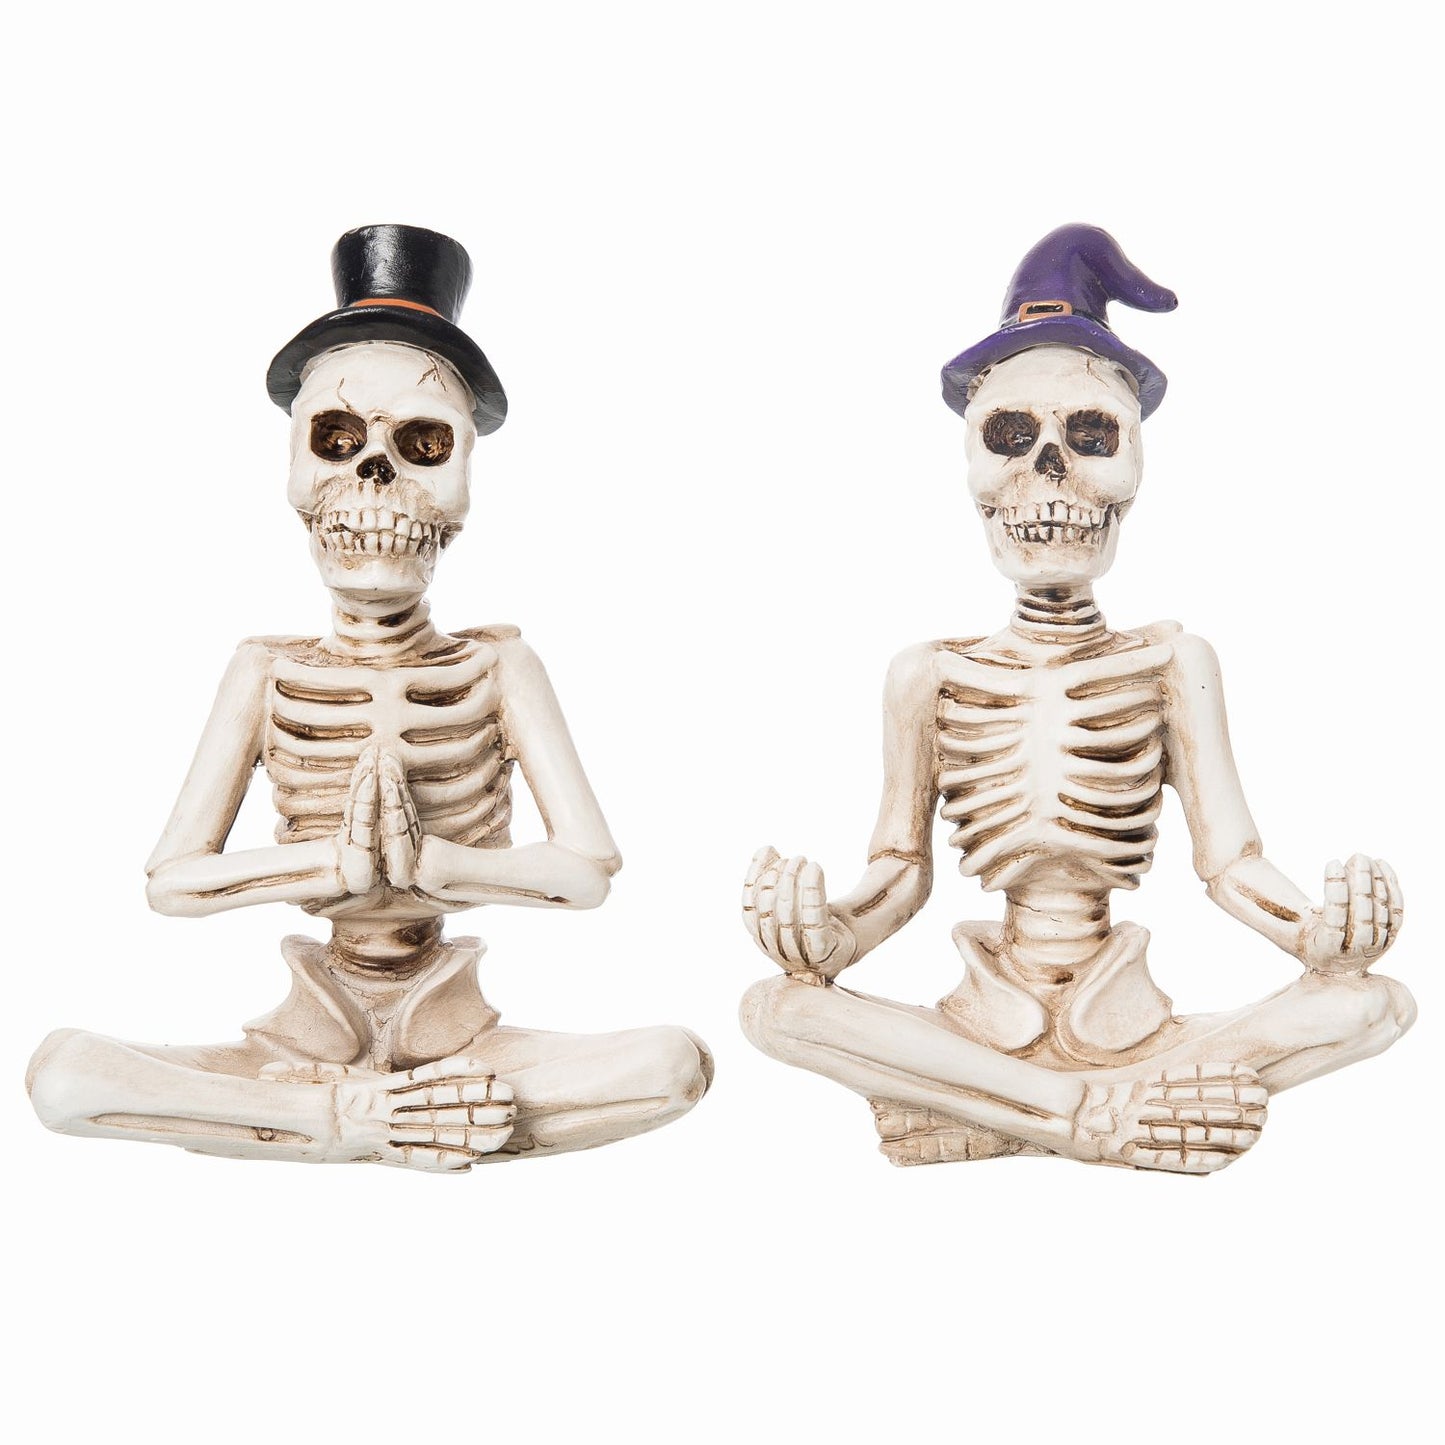 Transpac Resin Relaxed Skeleton Figurine, Set Of 2, Assortment